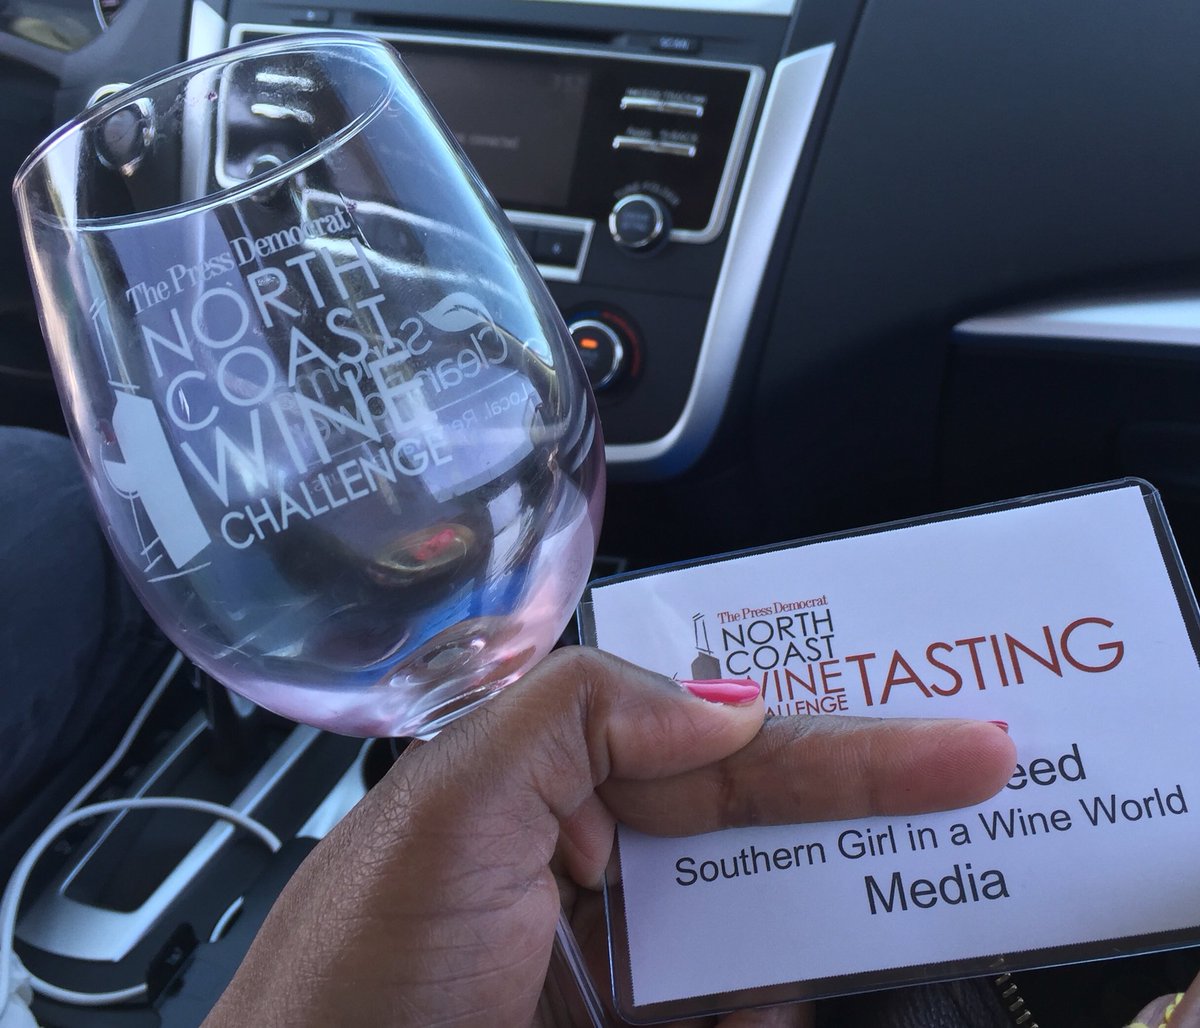 Beautiful day! Fantastic event! Thank you @northcoastwines! #wine #WineTasting #NorthCoastWines #GoldMedal